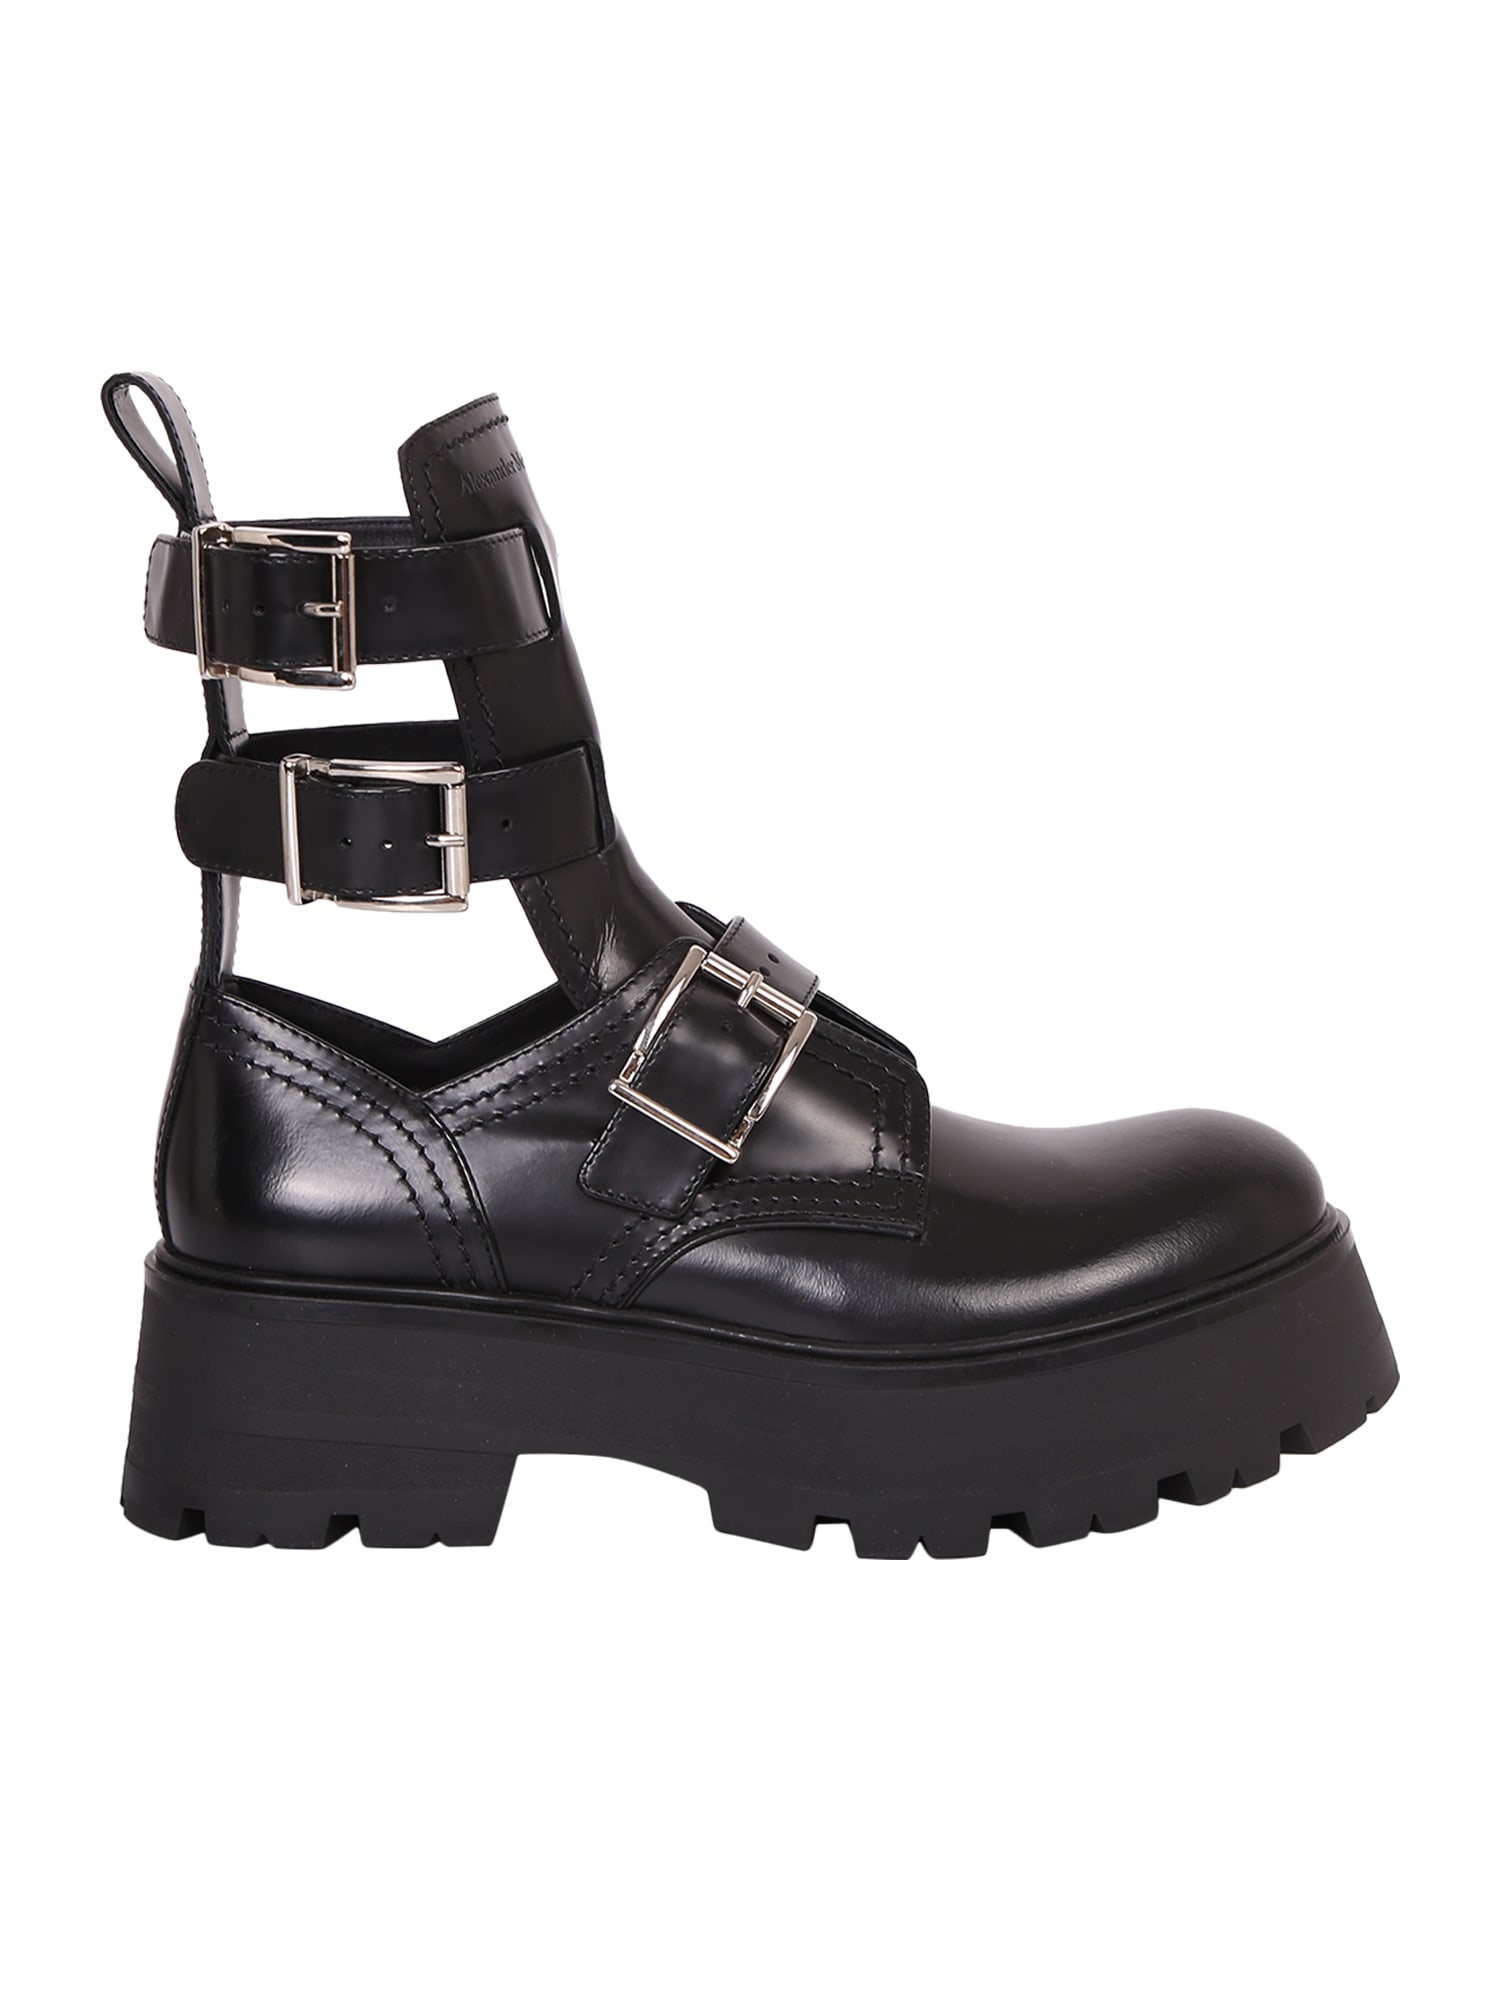 Alexander McQueen Buckled Leather Boots